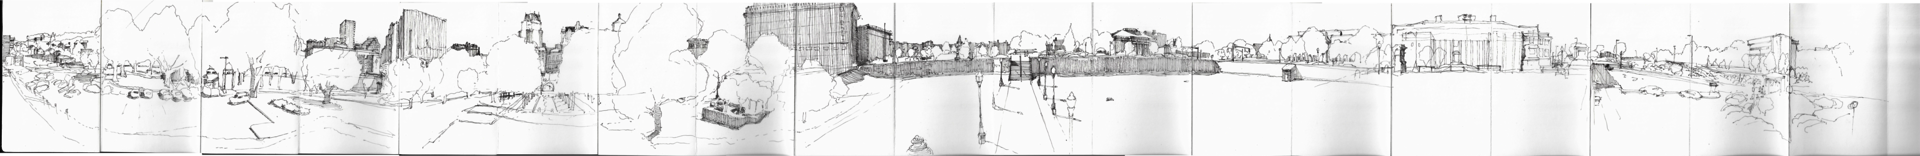 Panorama Perspectival Site Drawing of both the Statehouse lawn and the former town it displaced. Created by walking around the base of the statehouse, the drawing covers 360 degrees of vision, yet 2 notable elements escape its frame: The statehouse itself, and the demolished Snowtown.